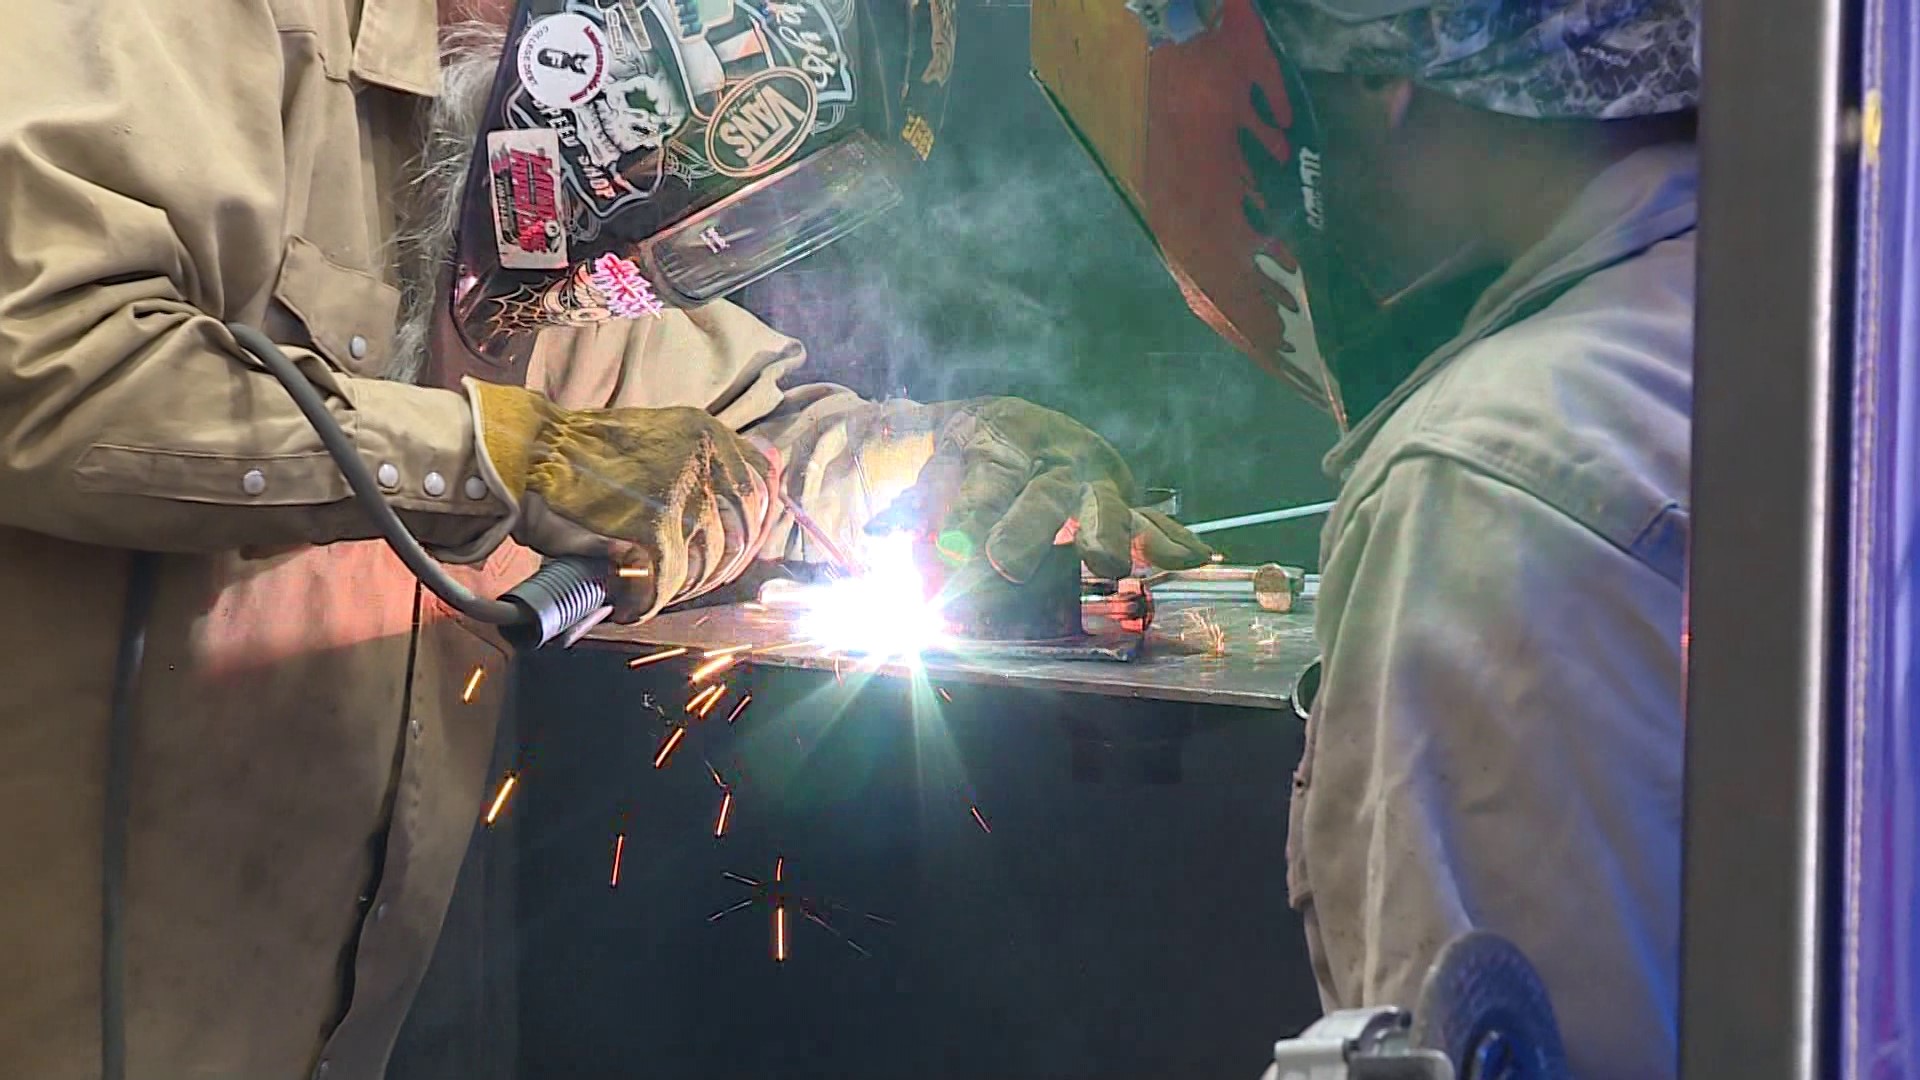 Danny and Angela Cobb are training students how to weld at American Welding Laboratories in Fort Smith, Arkansas.